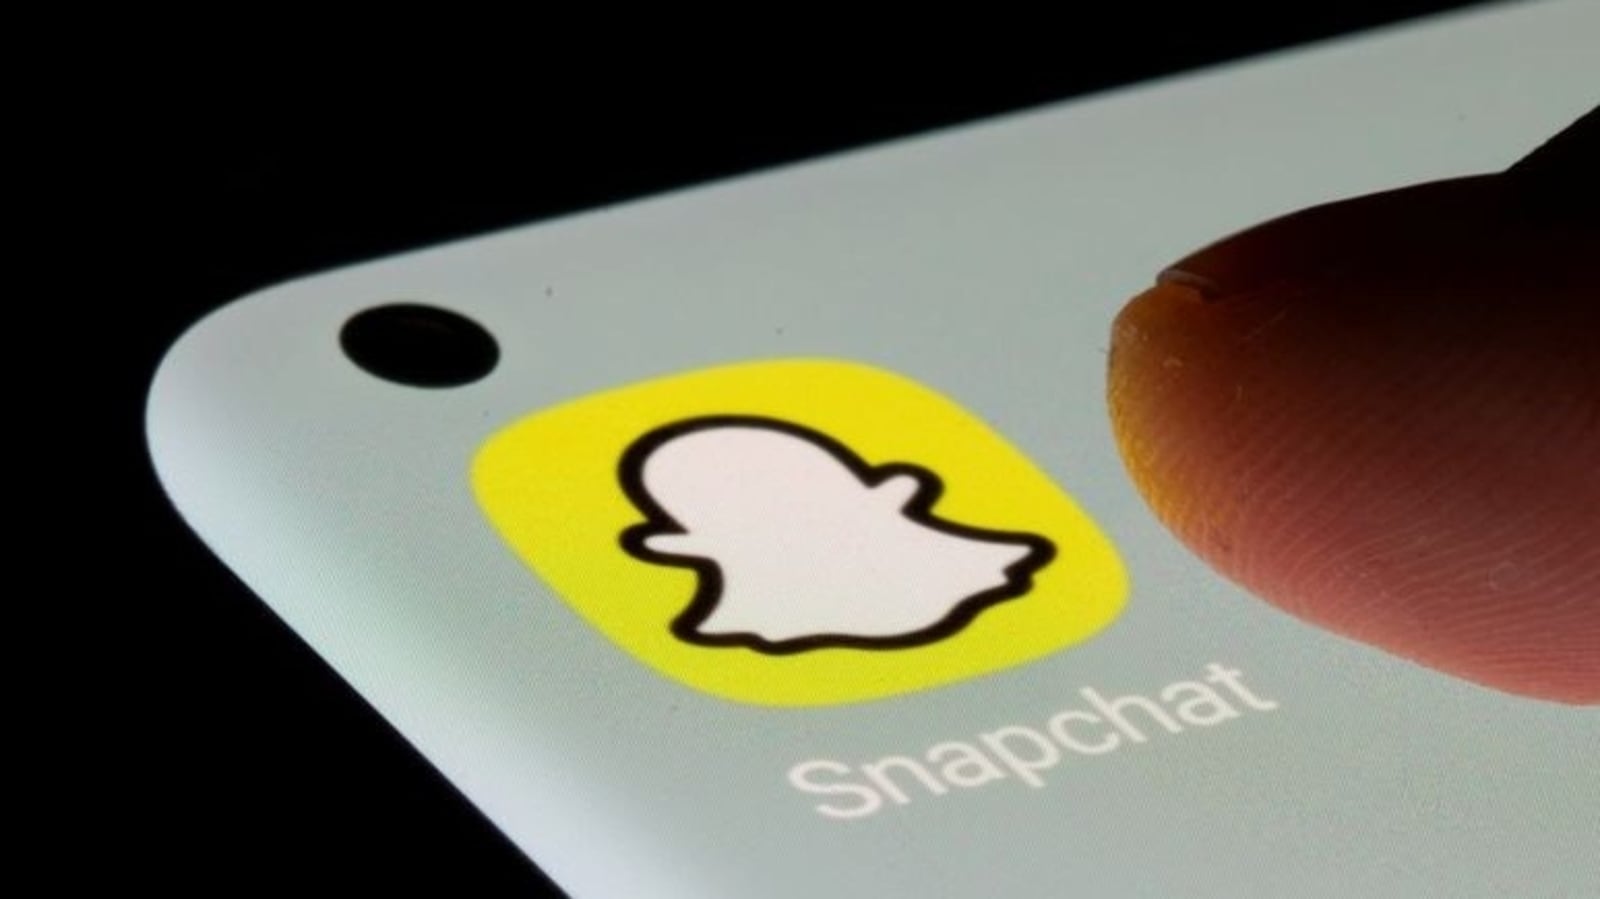 How To Use Snapchat On Pc Without Emulator